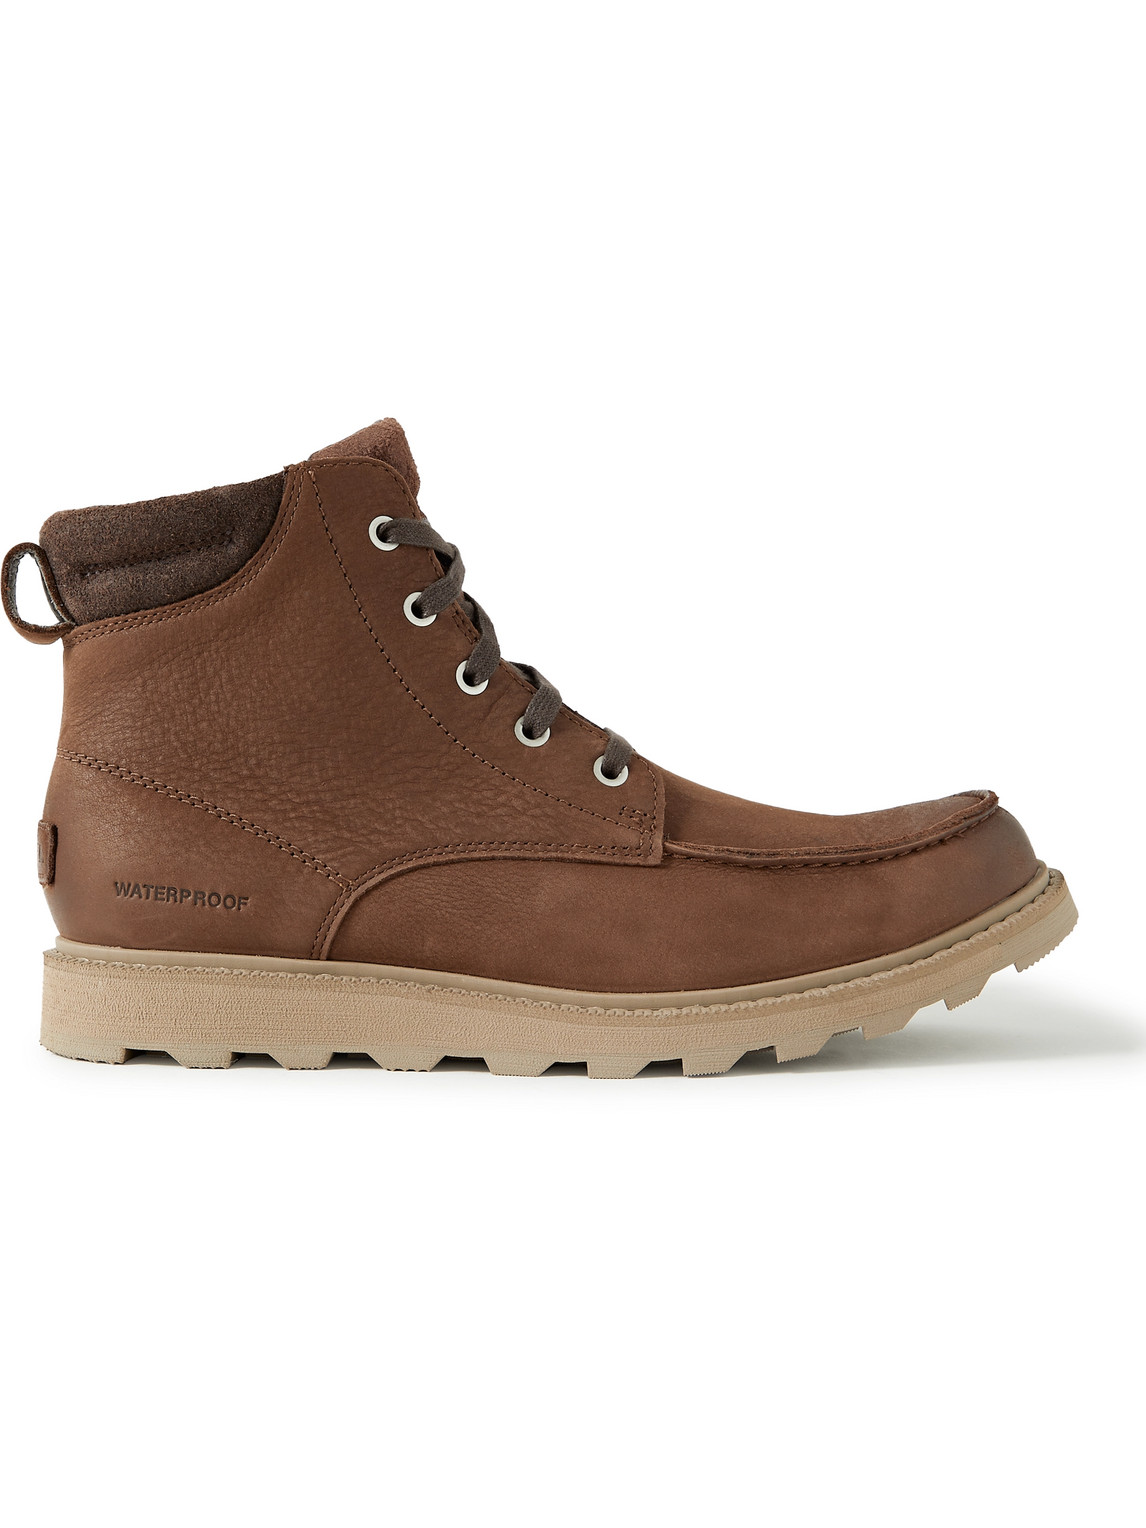 SOREL MADSON II MOC SUEDE-TRIMMED BURNISHED TEXTURED-LEATHER BOOTS